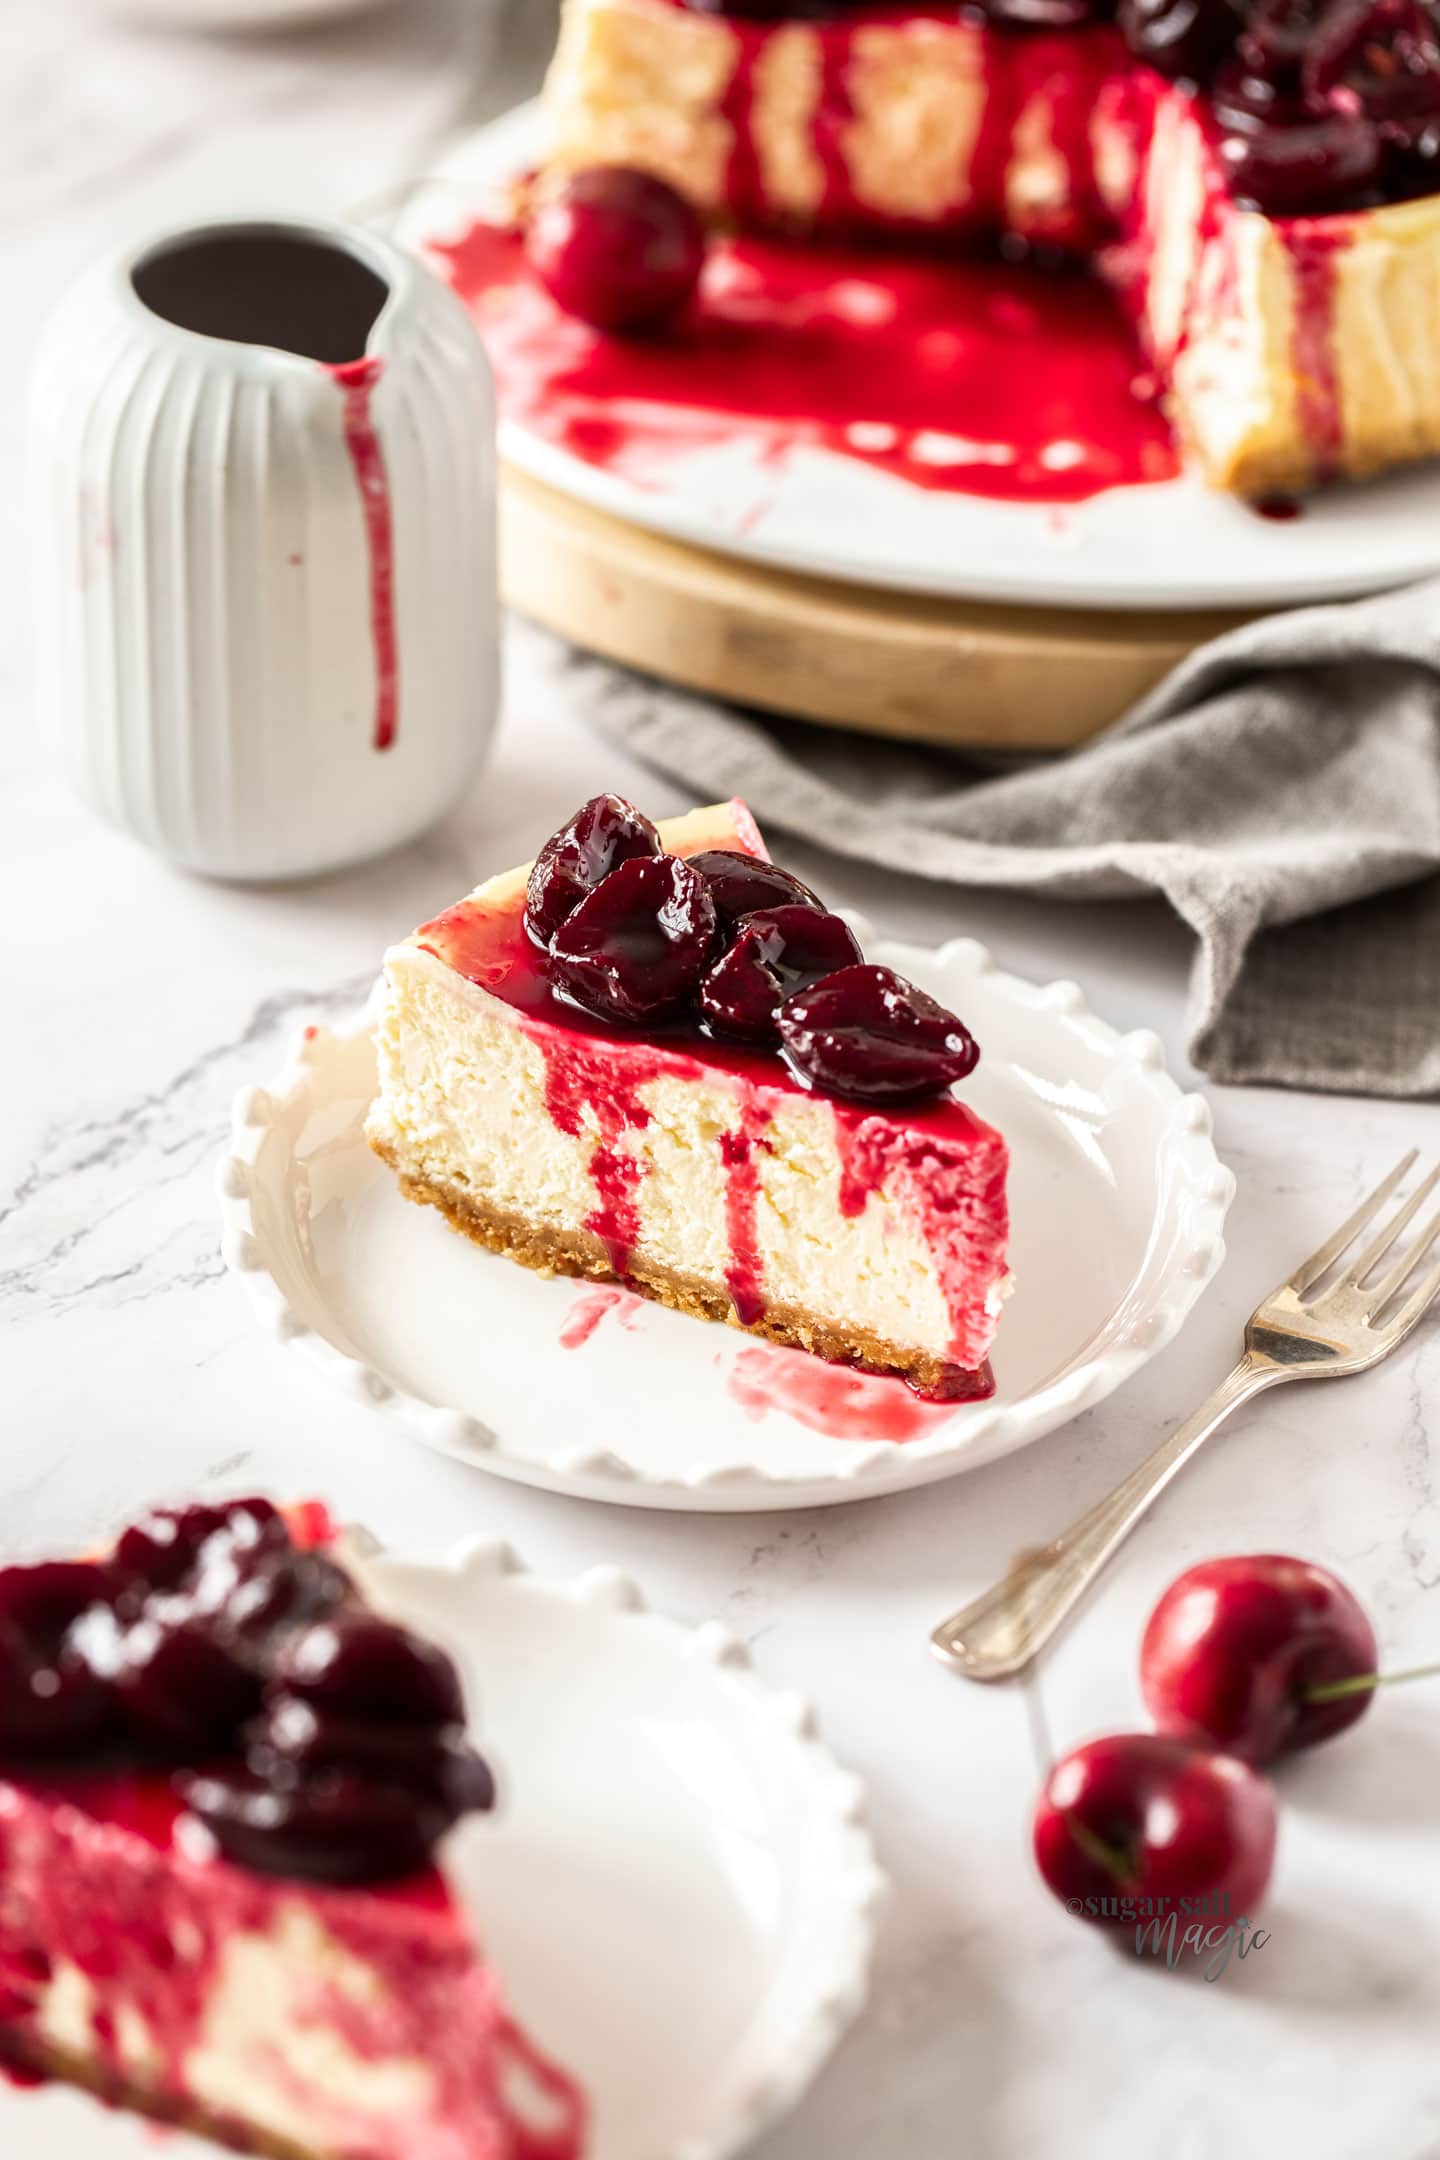 A slice of cherry cheesecake on a white plate with a fork next to it.